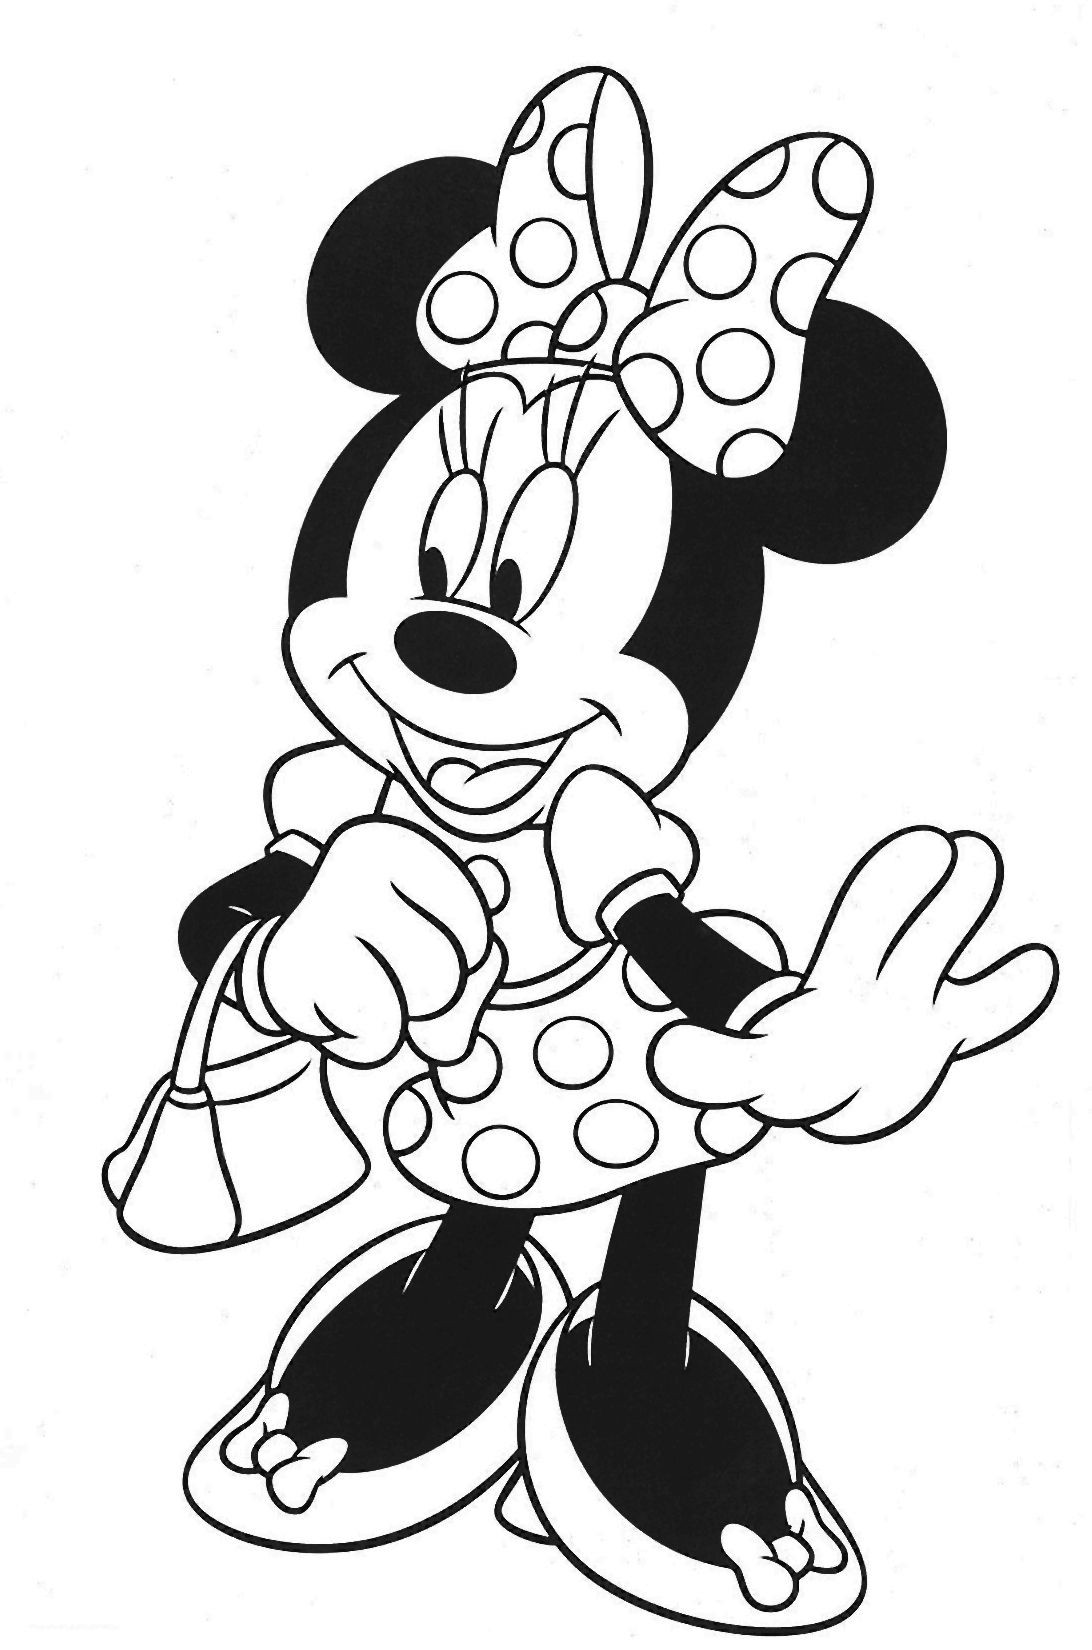 Mini Mouse Printable Coloring Pages
 Minnie Mouse